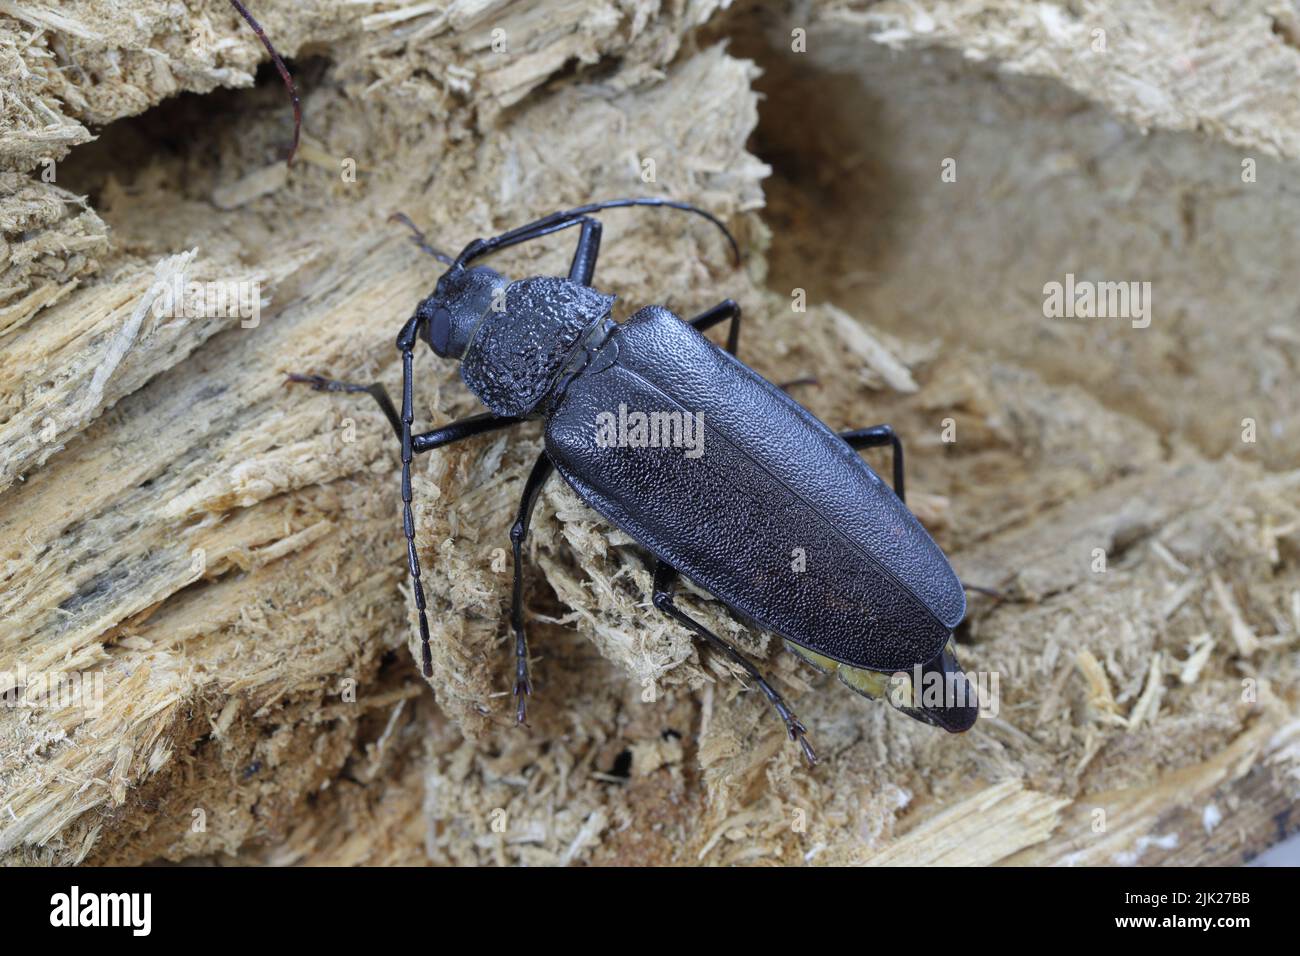 Carpenter longhorn, Long horned beetle (Ergates faber), female on deadwood pine stump in which the larvae were developing. Stock Photo